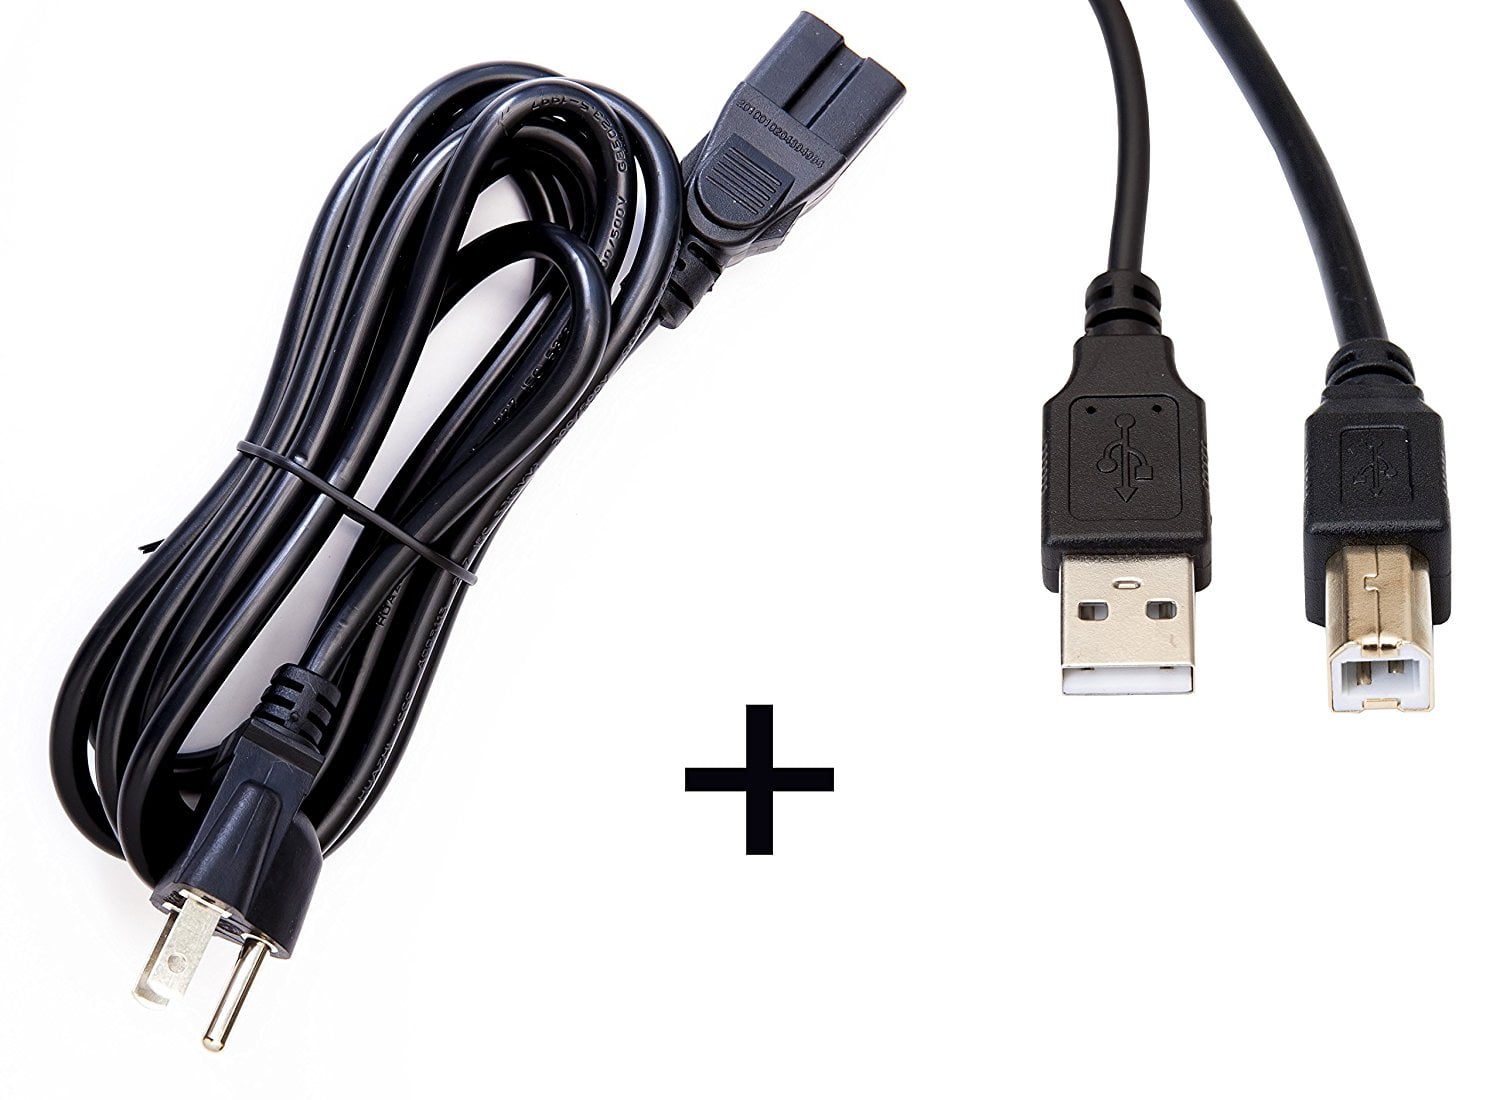 POWER Cord Wall Plug for Brother Inkjet Printer LONG USB Cable MODELS inside 